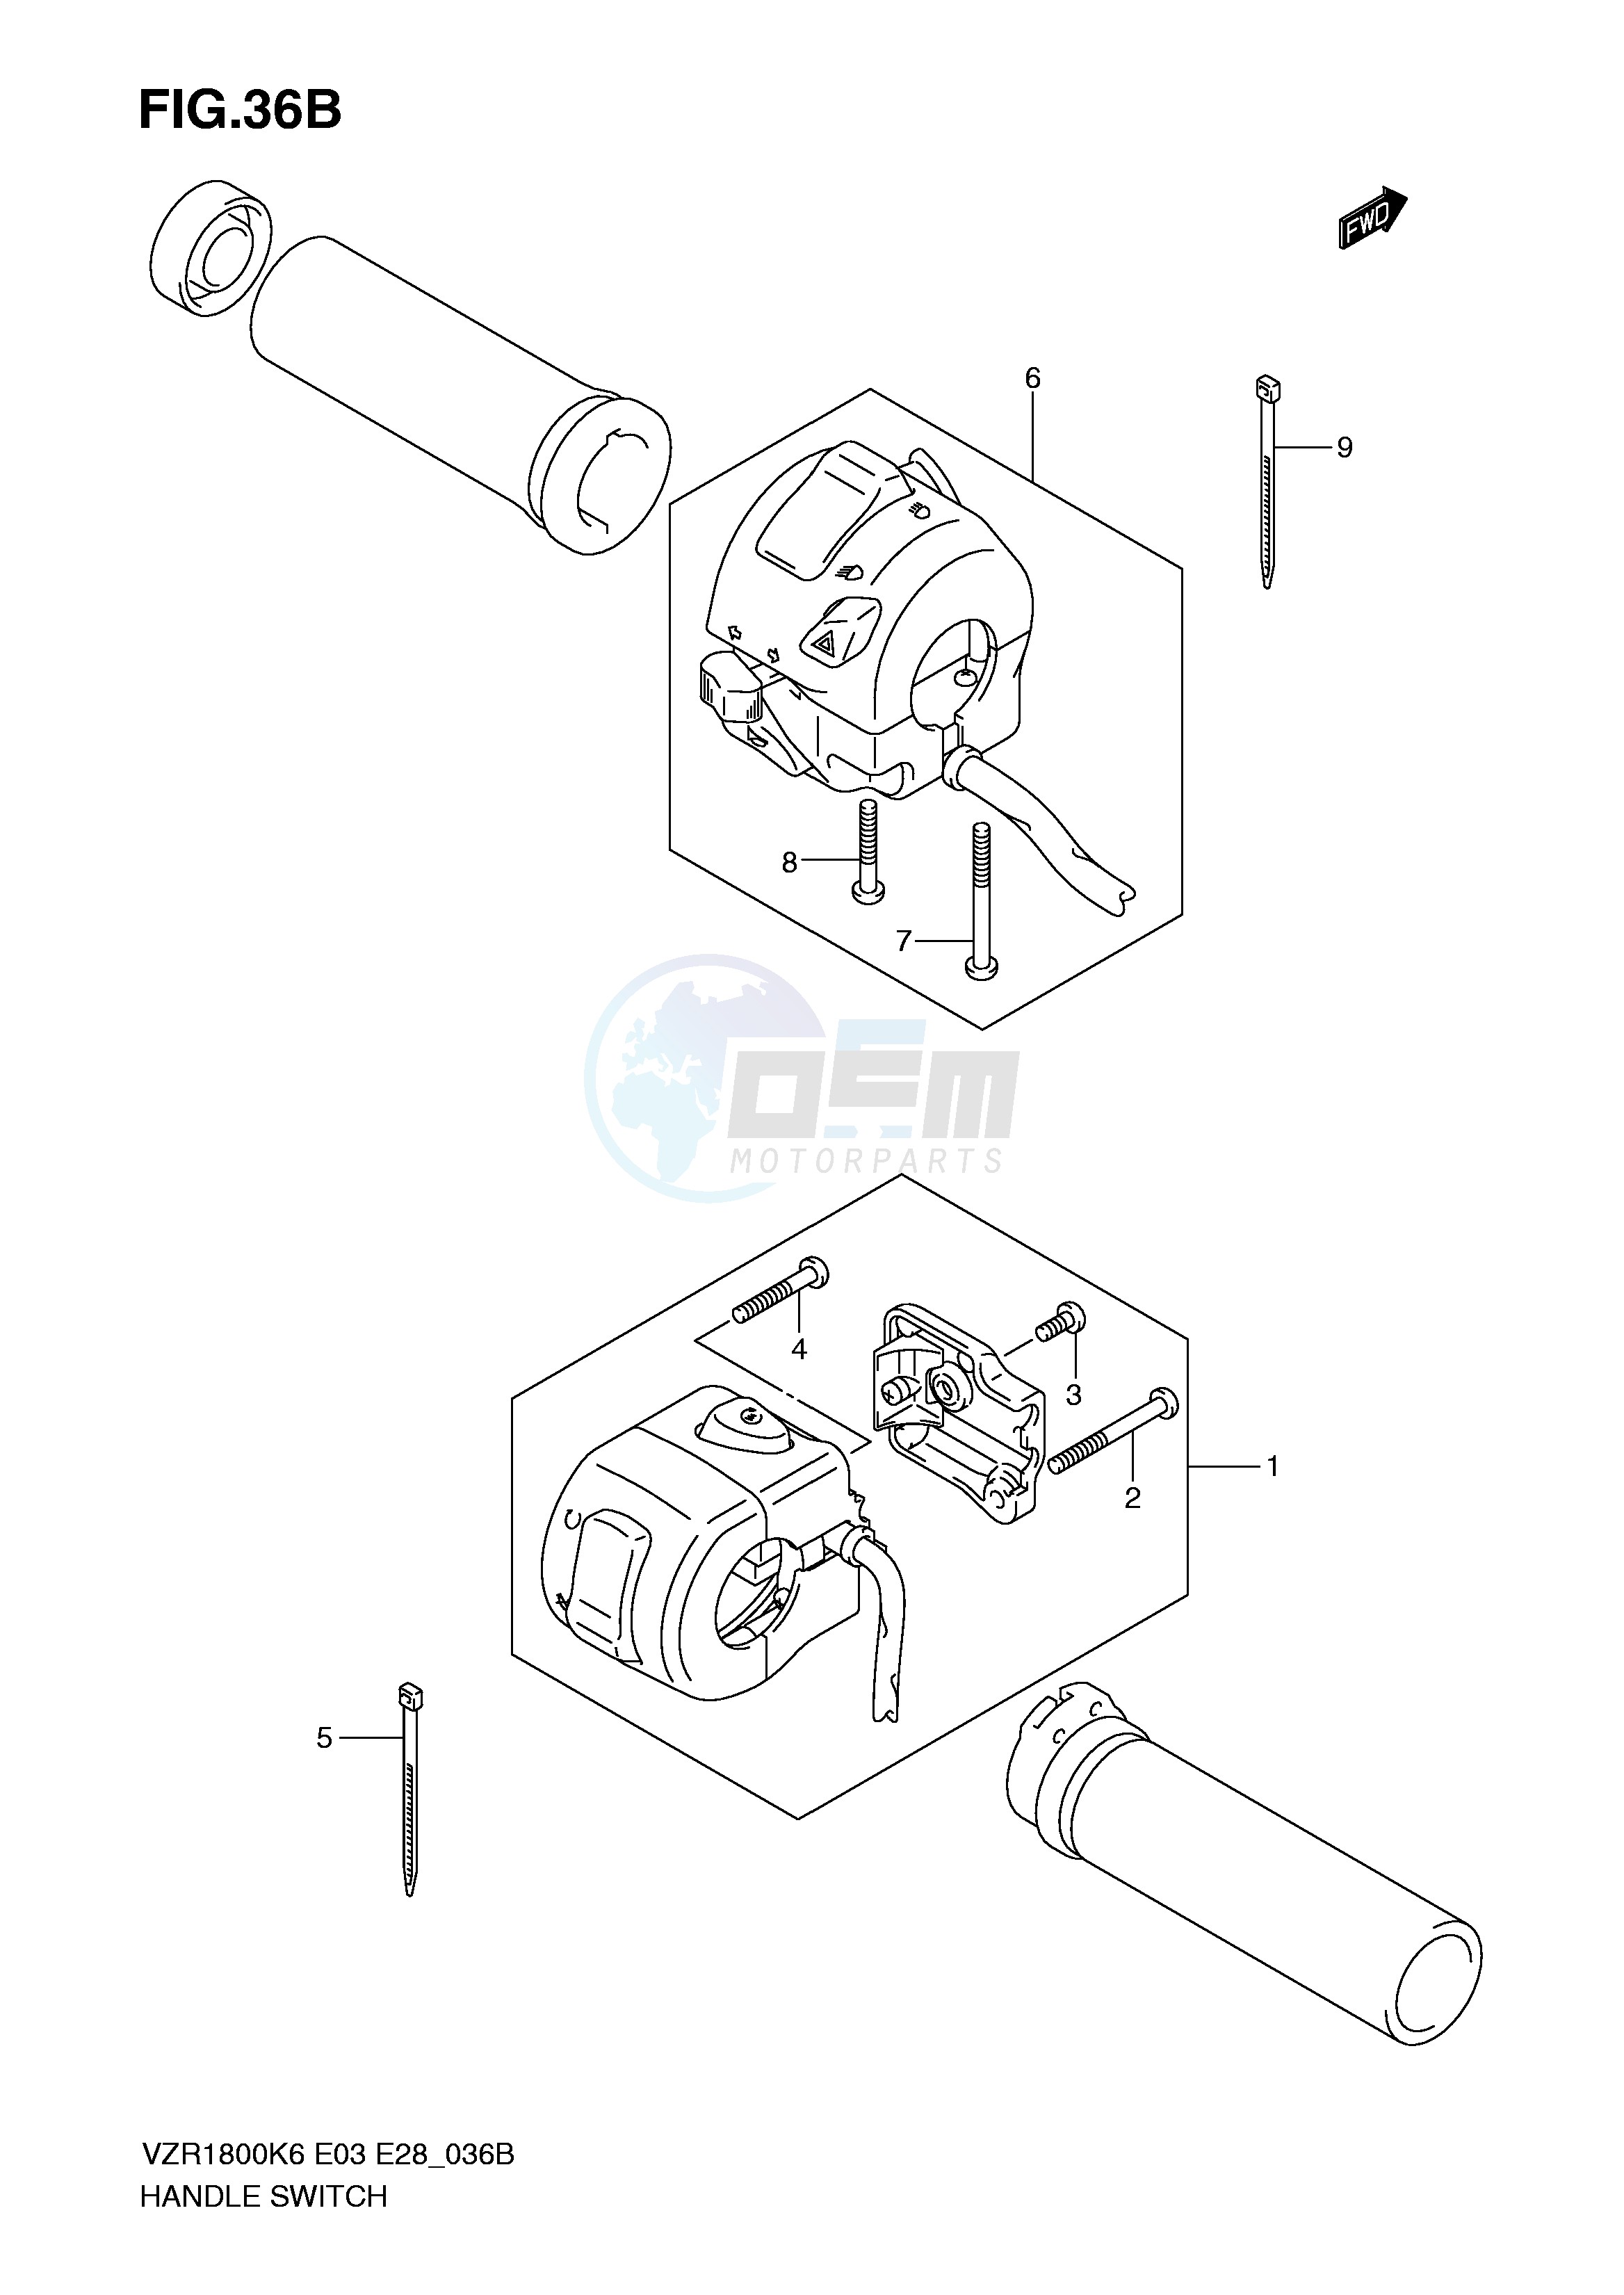 HANDLE SWITCH (VZR1800ZK9 ZL0) image